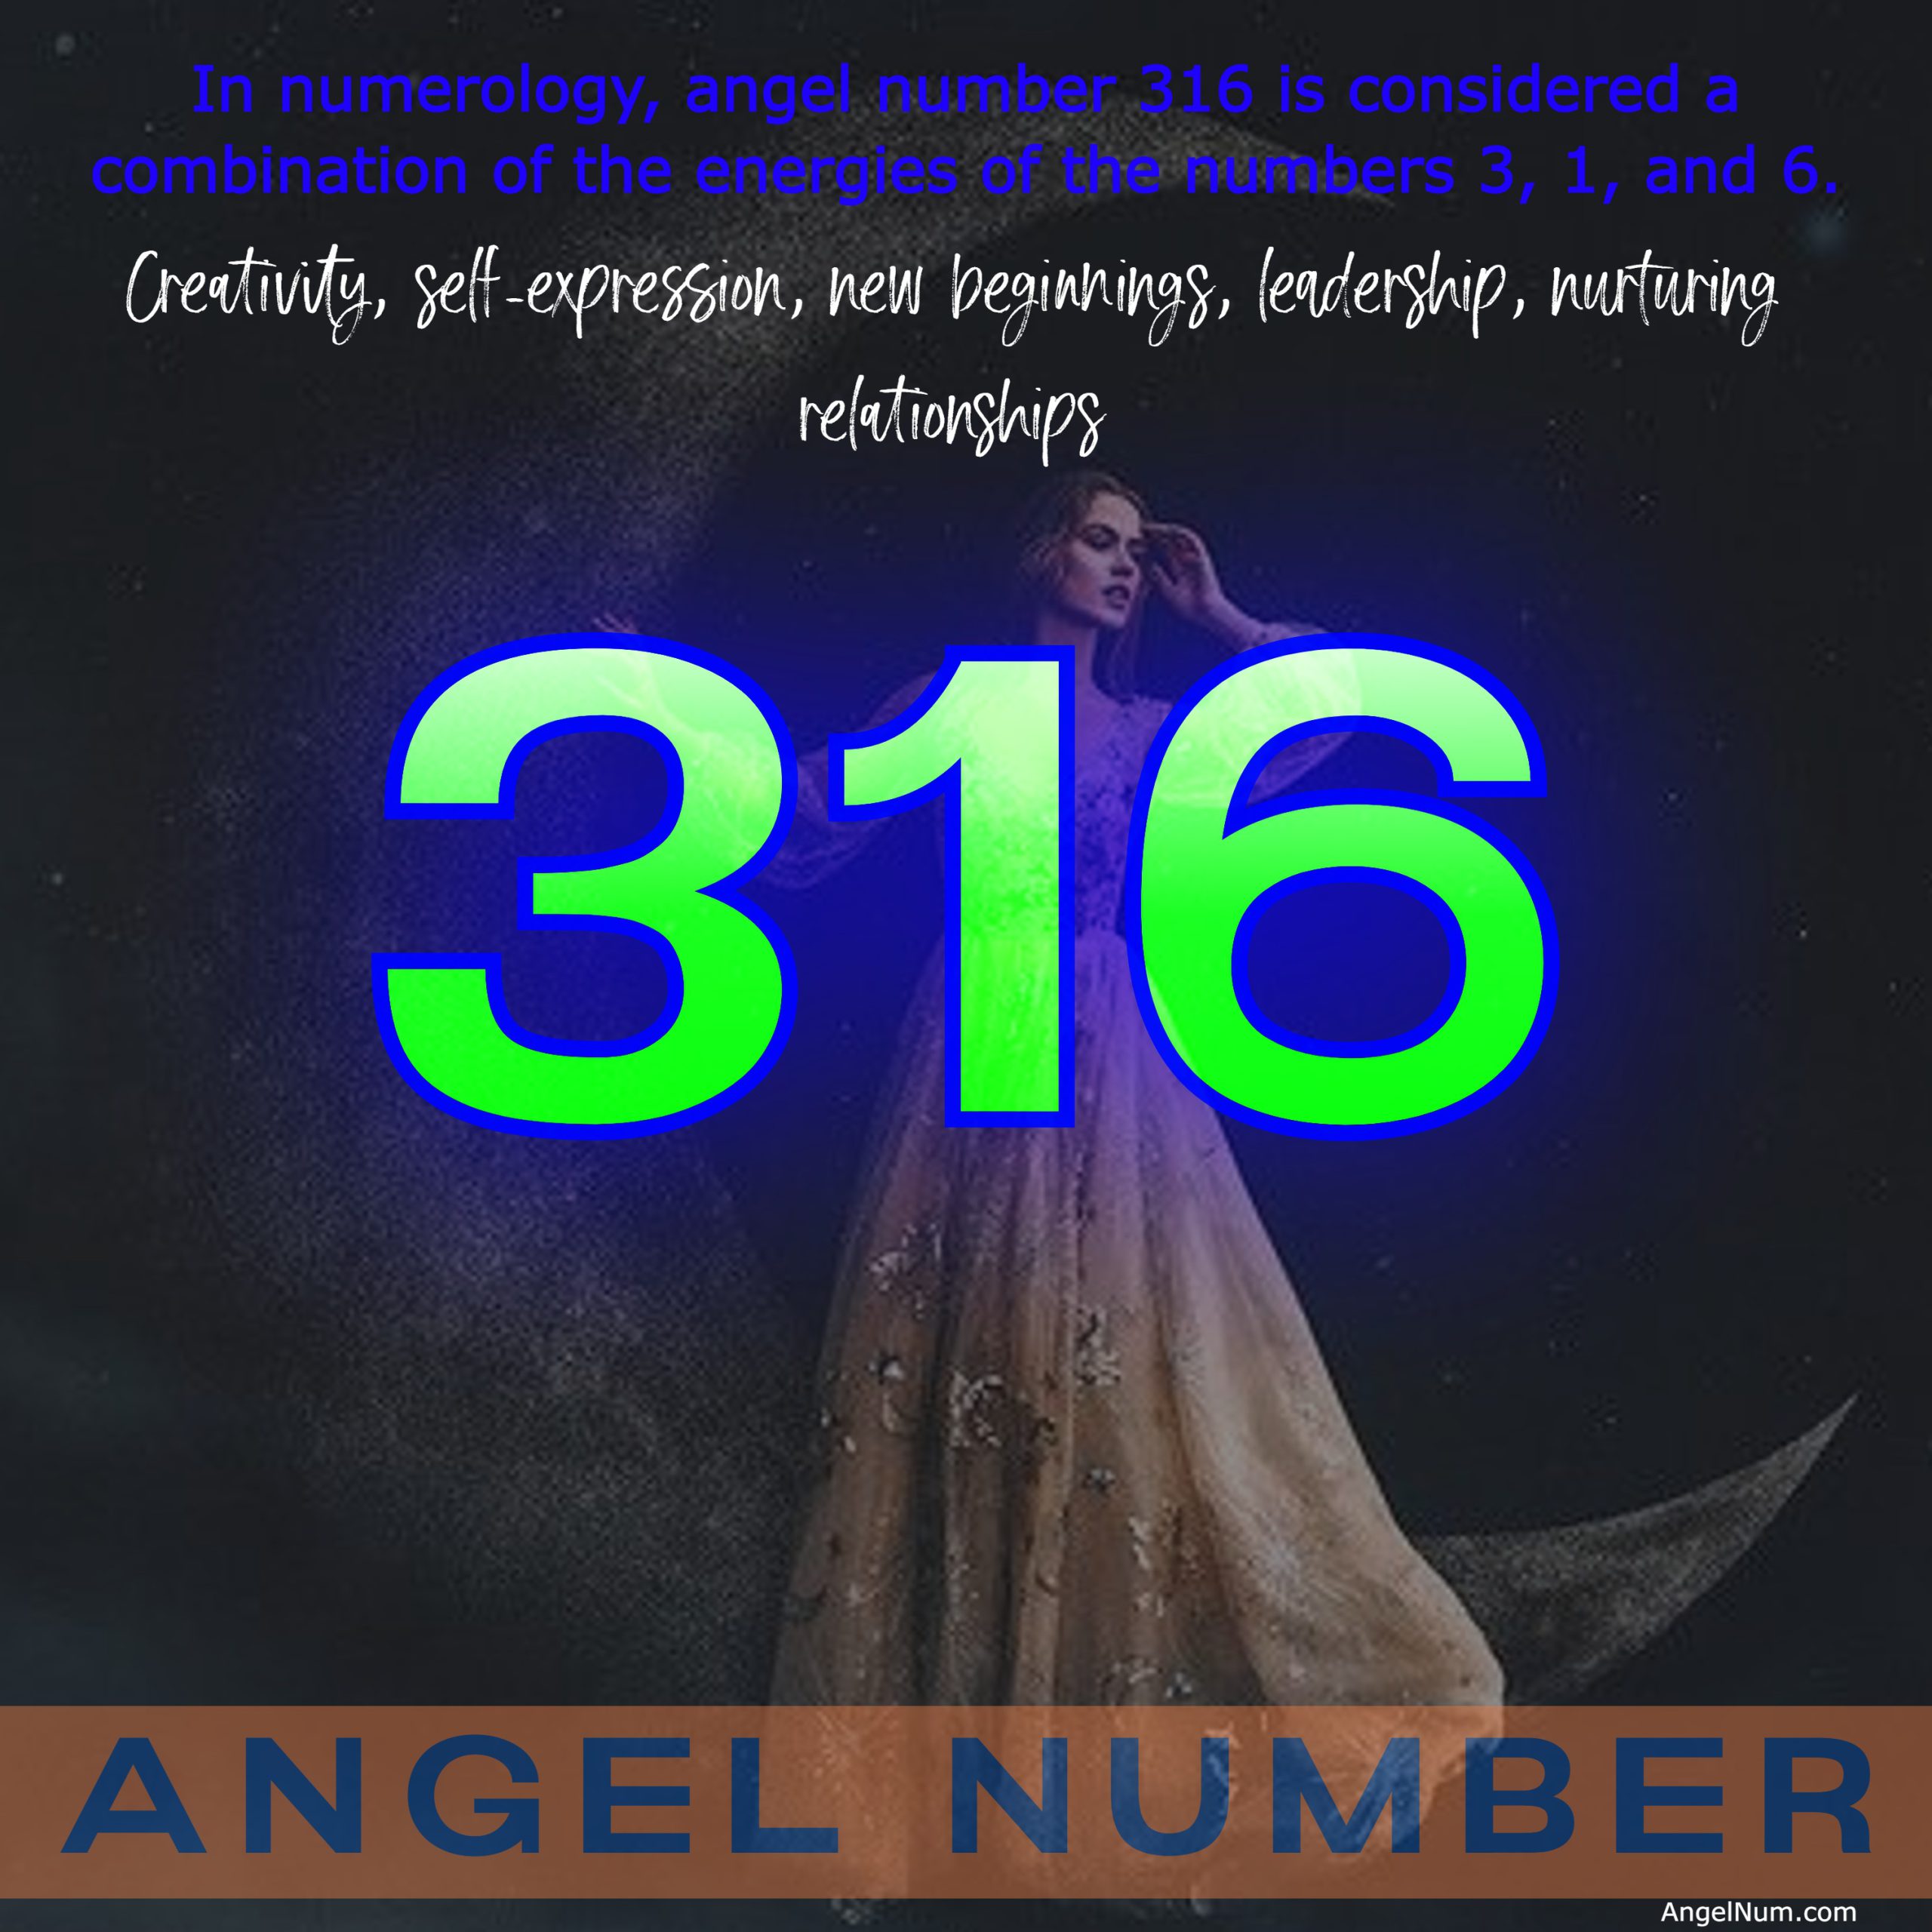 Unlocking the Meaning of Angel Number 316: Creativity, Relationships, and New Beginnings